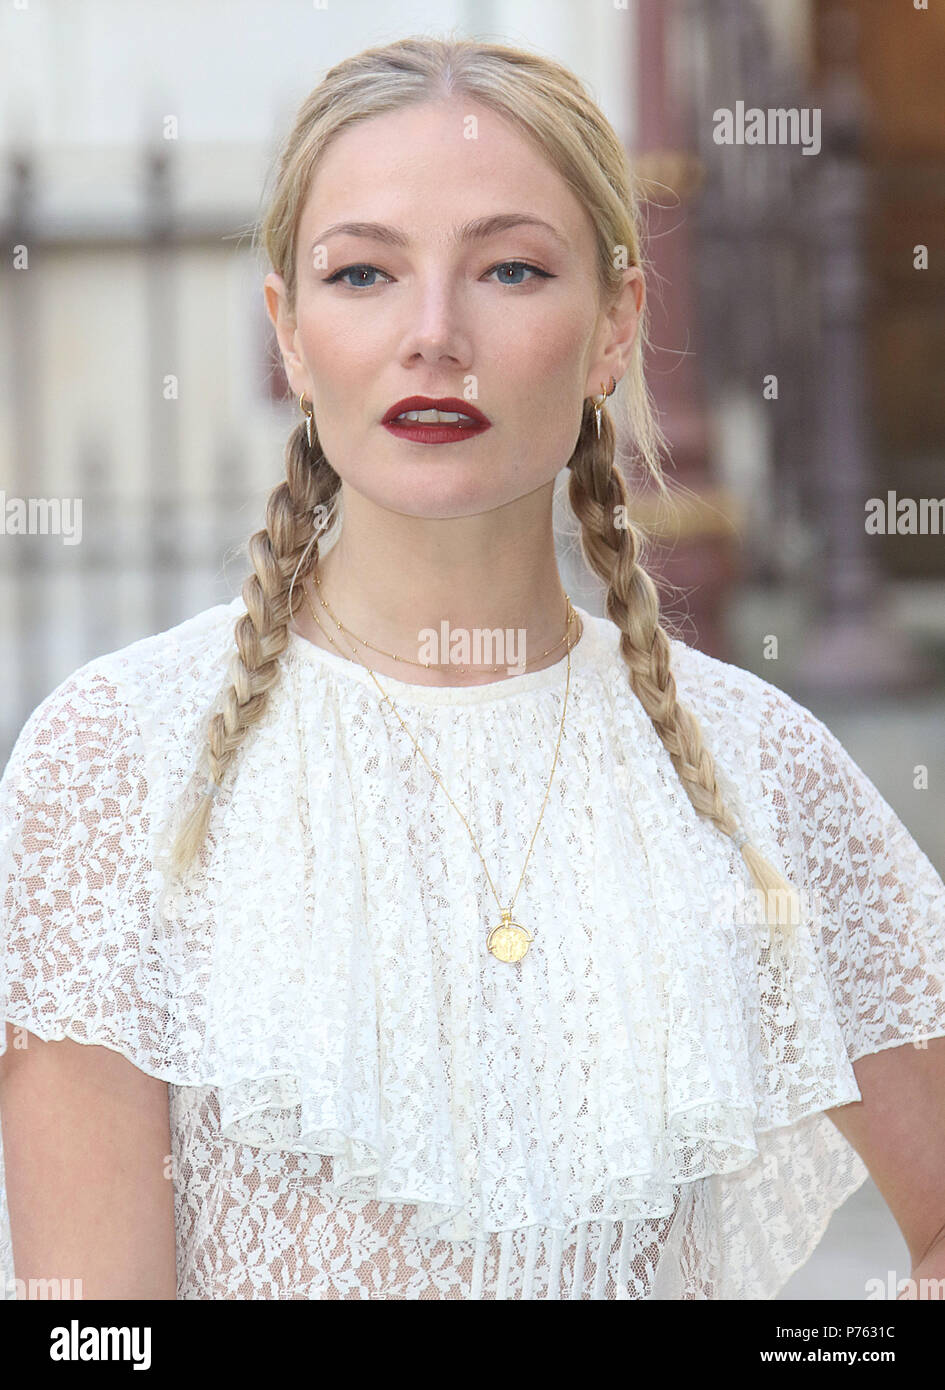 Jun 06, 2018 - Clara Paget attending Royal Academy Of Arts 250th Summer Exhibition Preview Party at Burlington House in London, England, UK Stock Photo